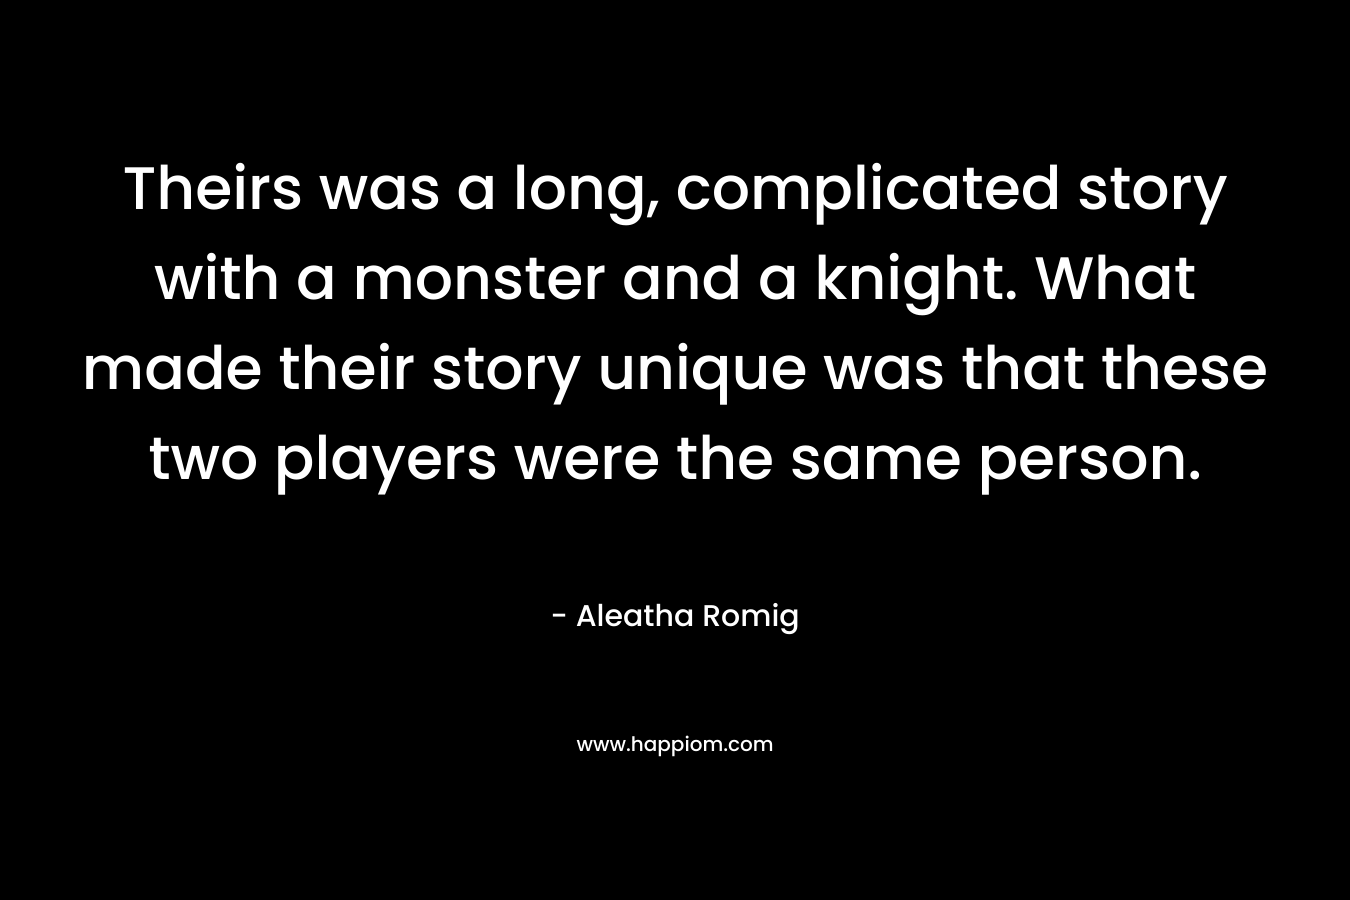 Theirs was a long, complicated story with a monster and a knight. What made their story unique was that these two players were the same person. – Aleatha Romig